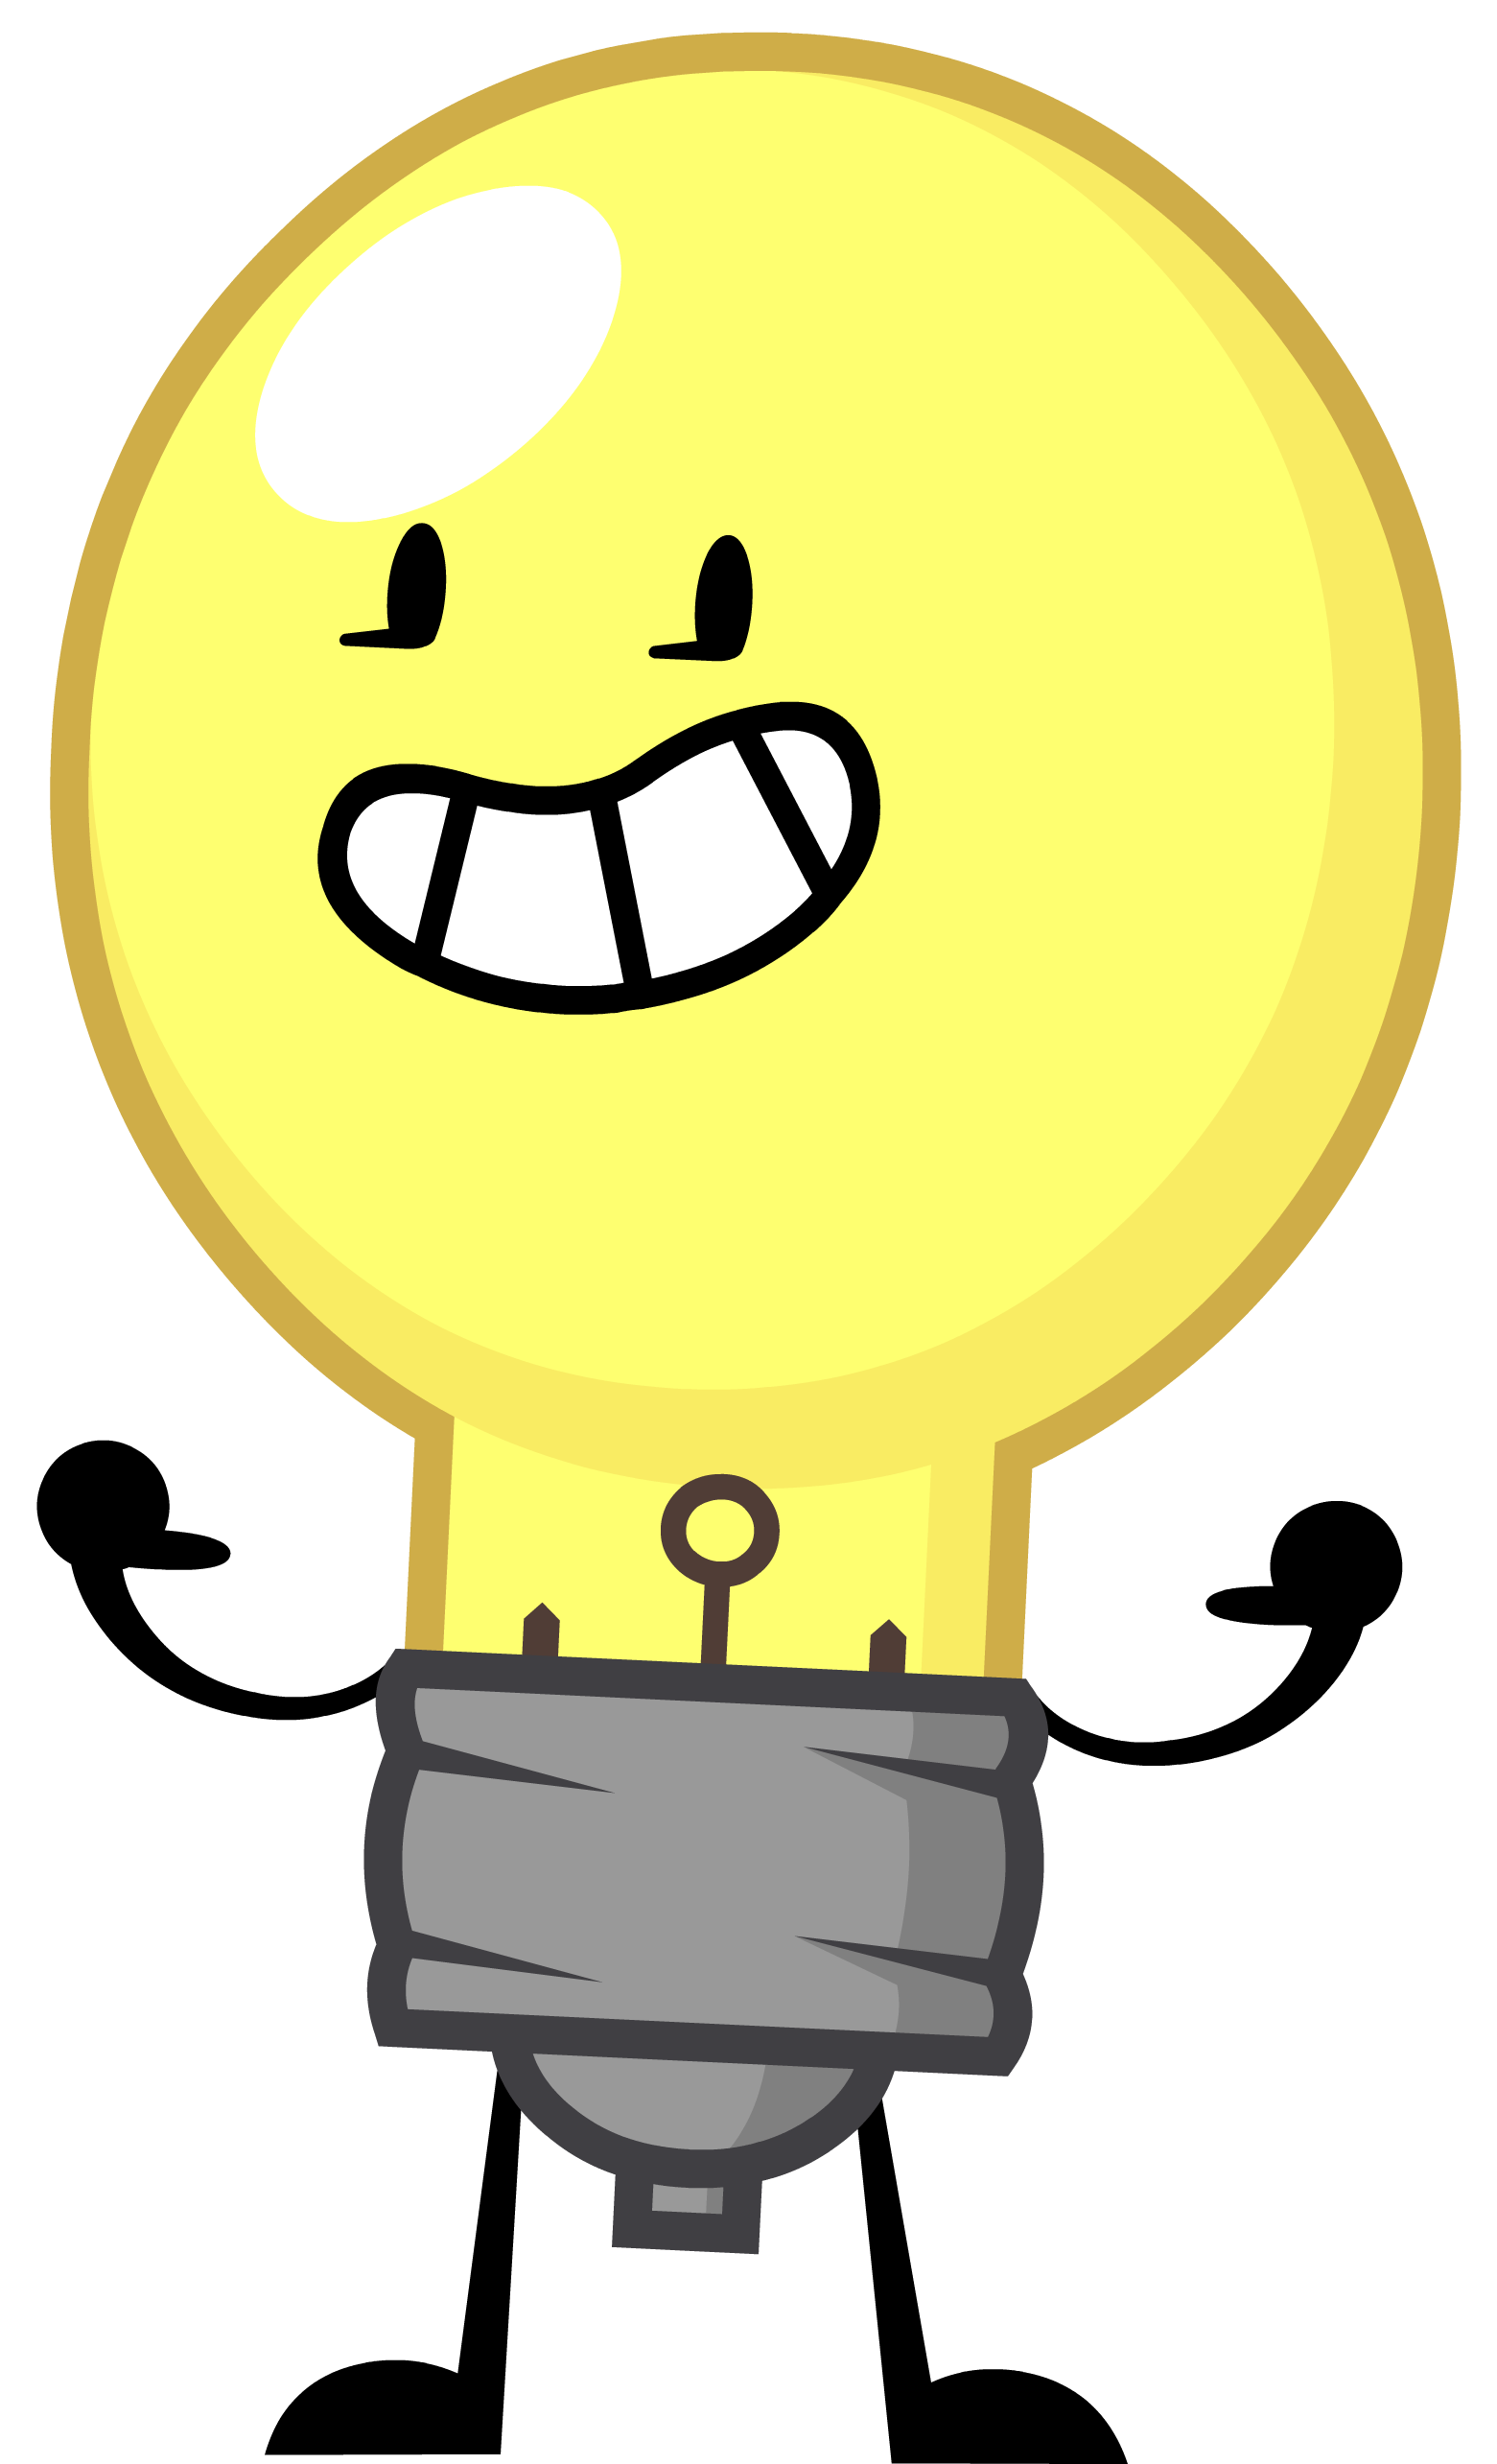 Lightbulb Inanimate Insanity Wiki Fandom Powered By Wikia - the best scary game in roblox ever roblox light bulb